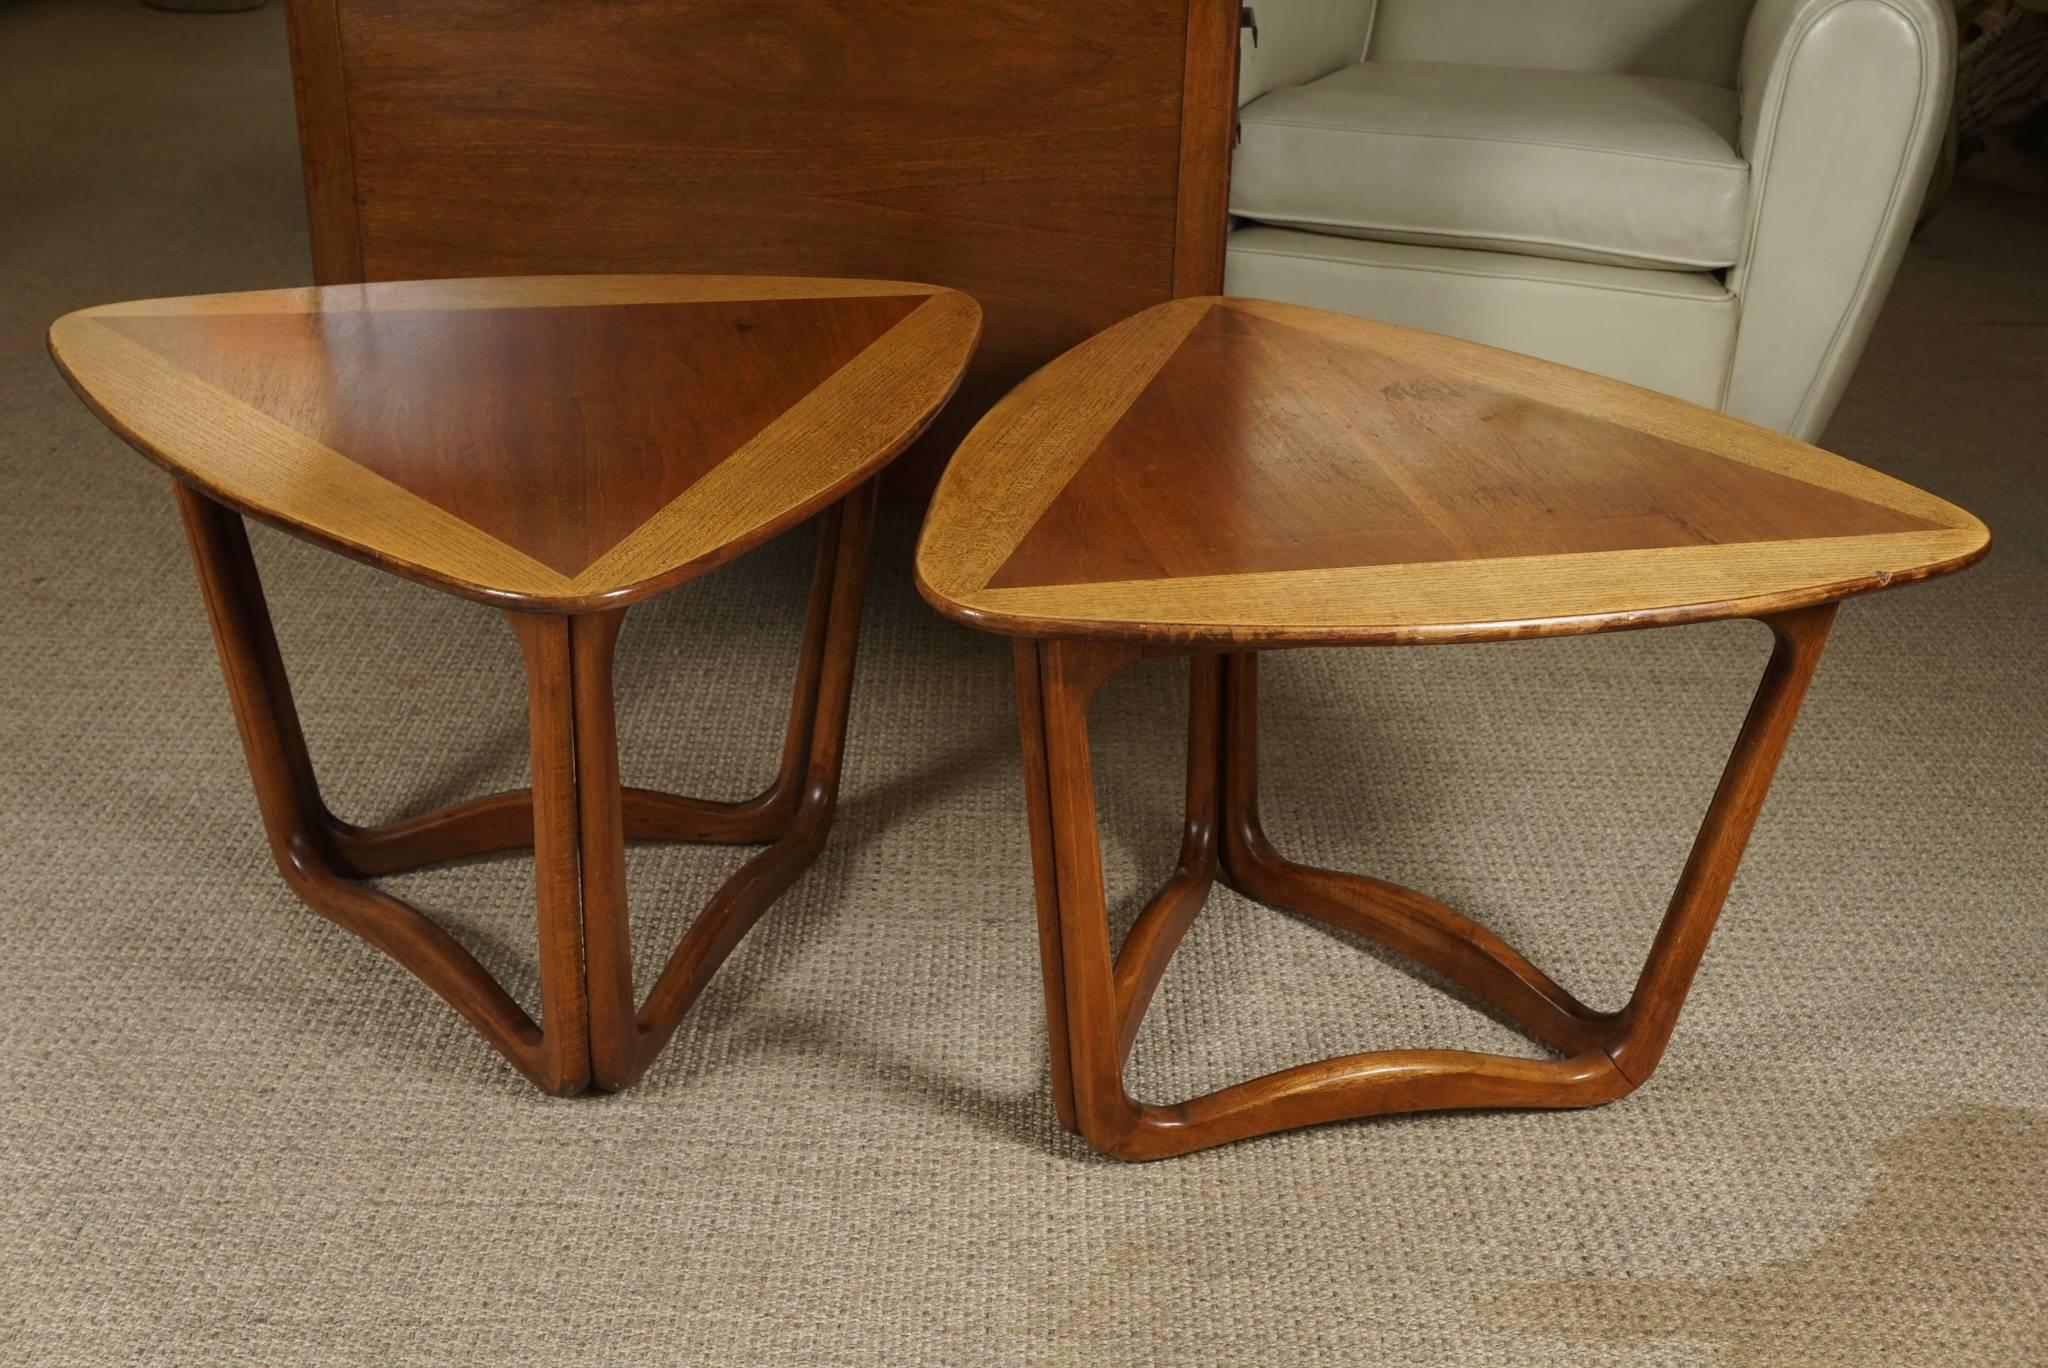 Here is a great pair of end tables with a triangular top. The two tone top makes a graphic statement that is echoed in the base.